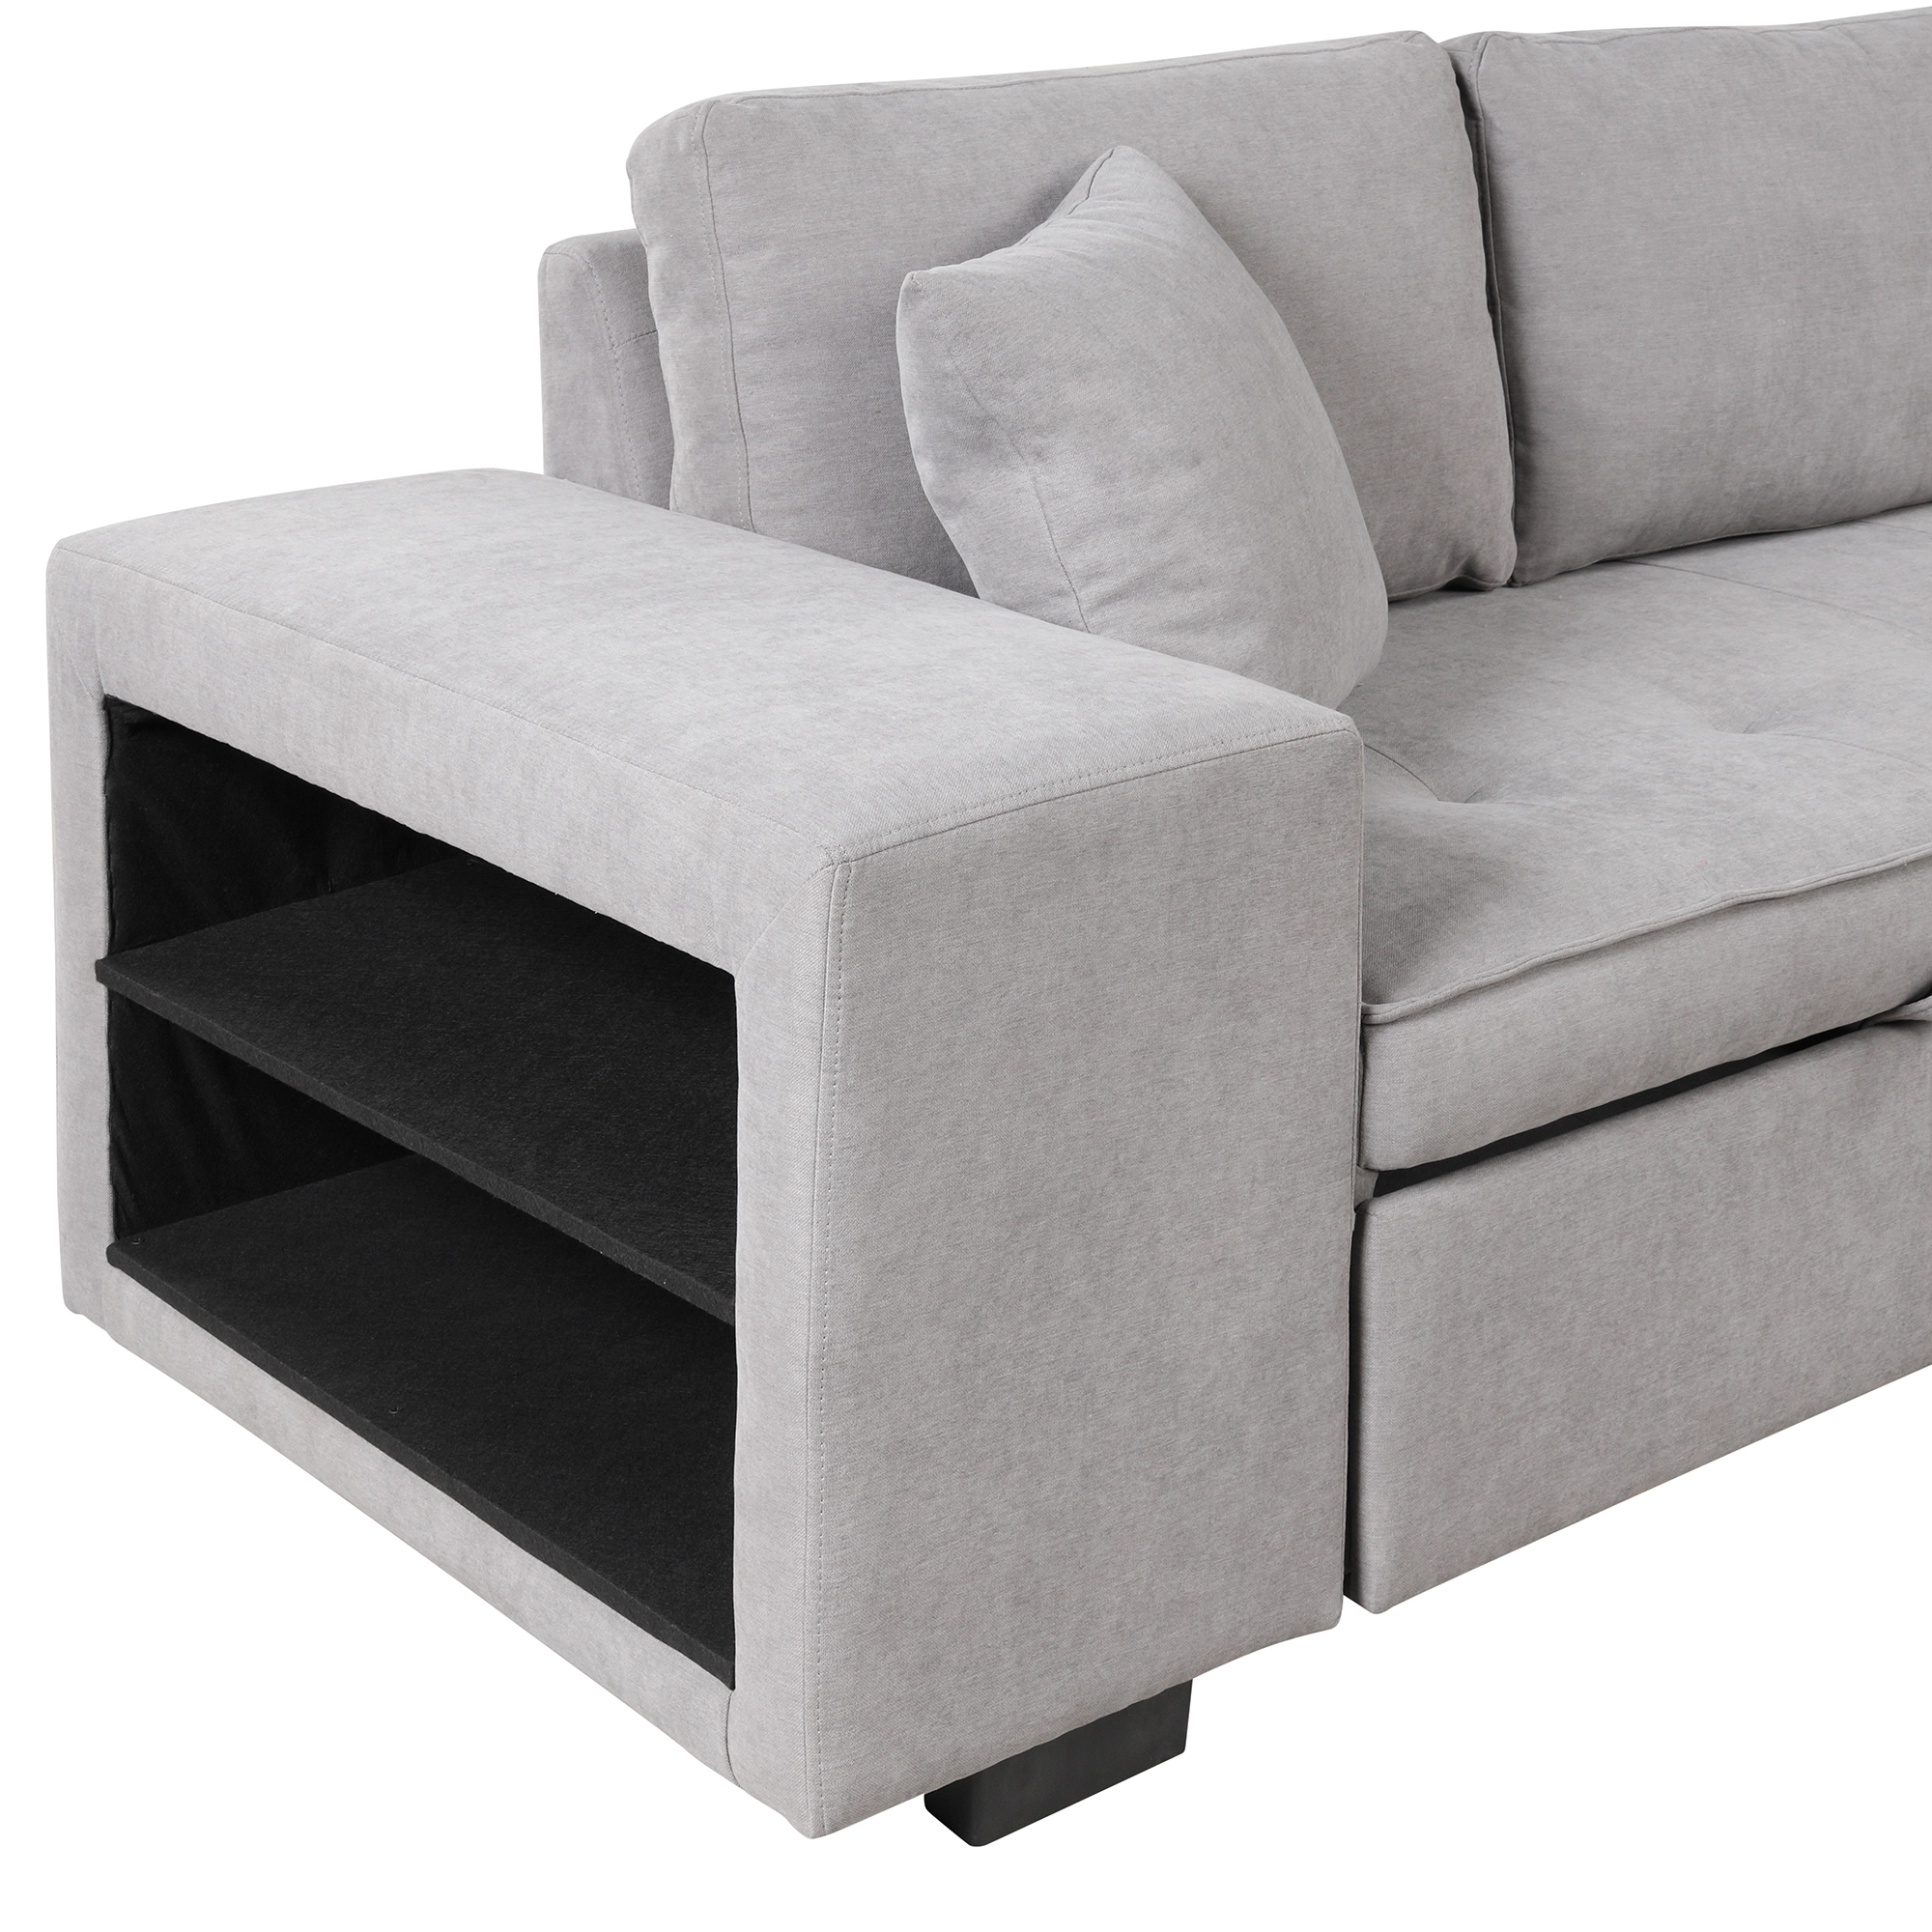 L-Shape 3 Seat Sectional Couch with Storage Chaise and 2 Stools - SG000430AAA